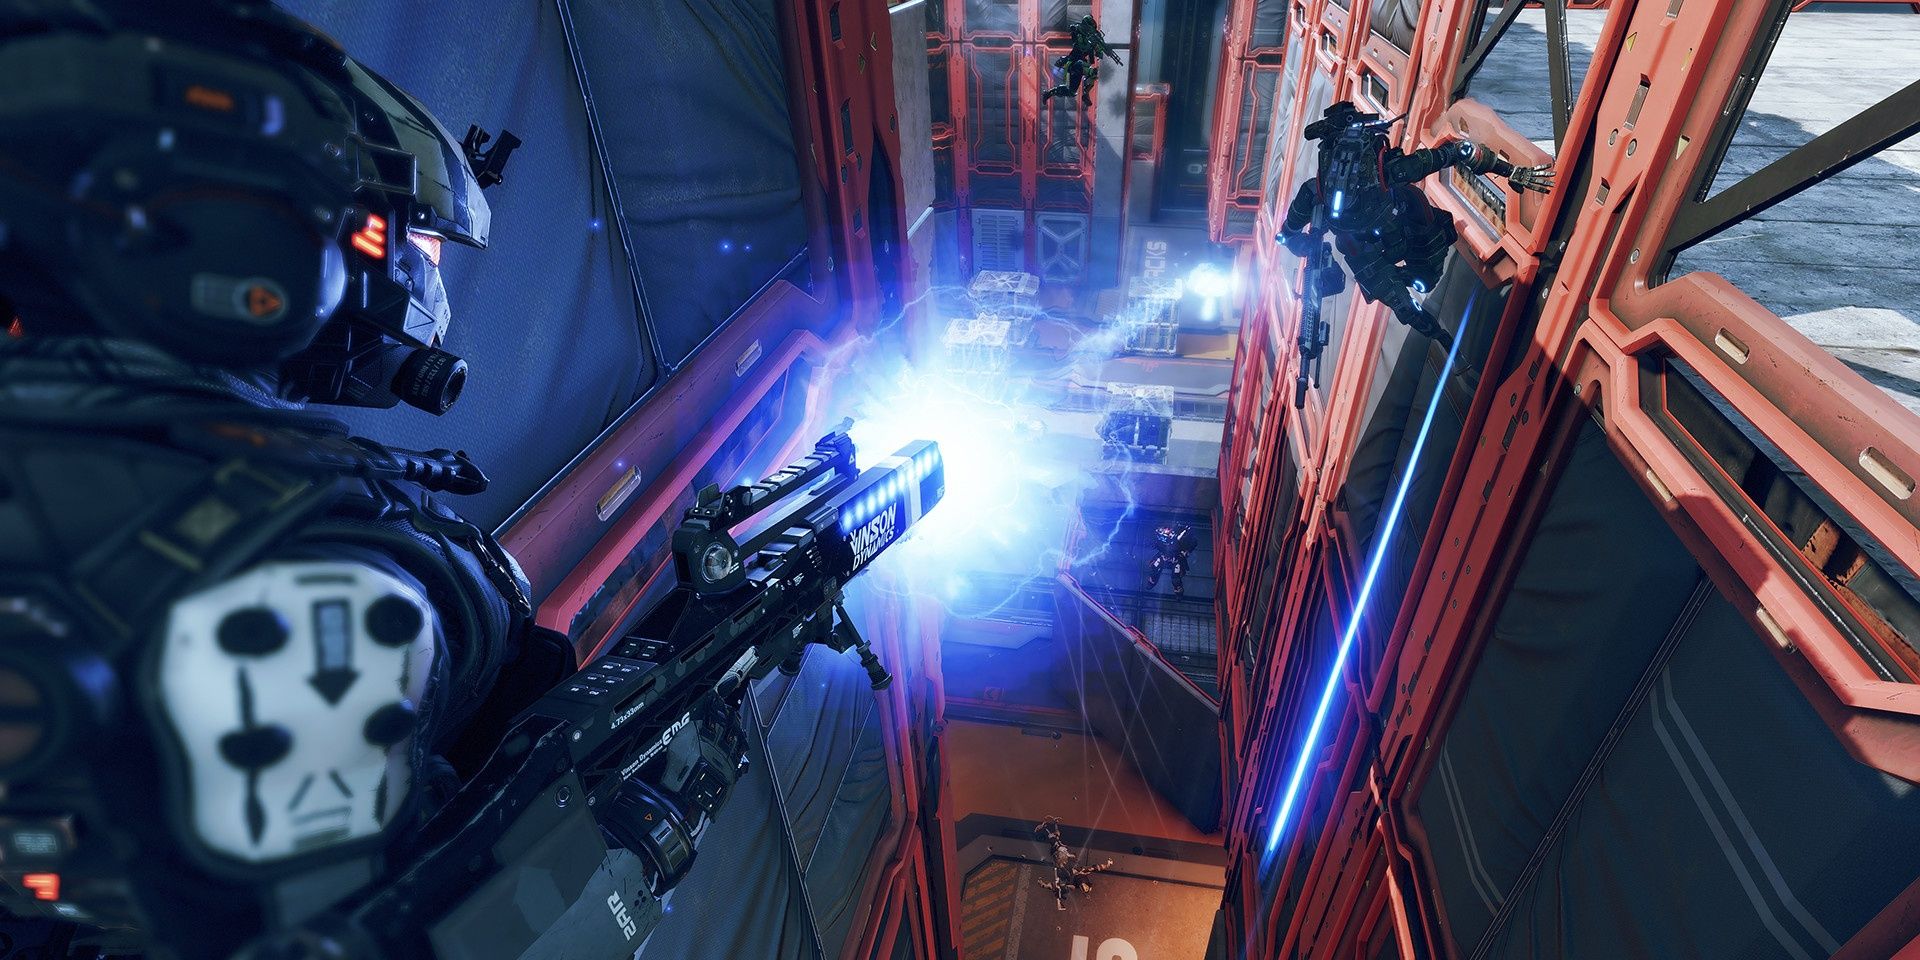 A screenshot showing gameplay in Titanfall 2.